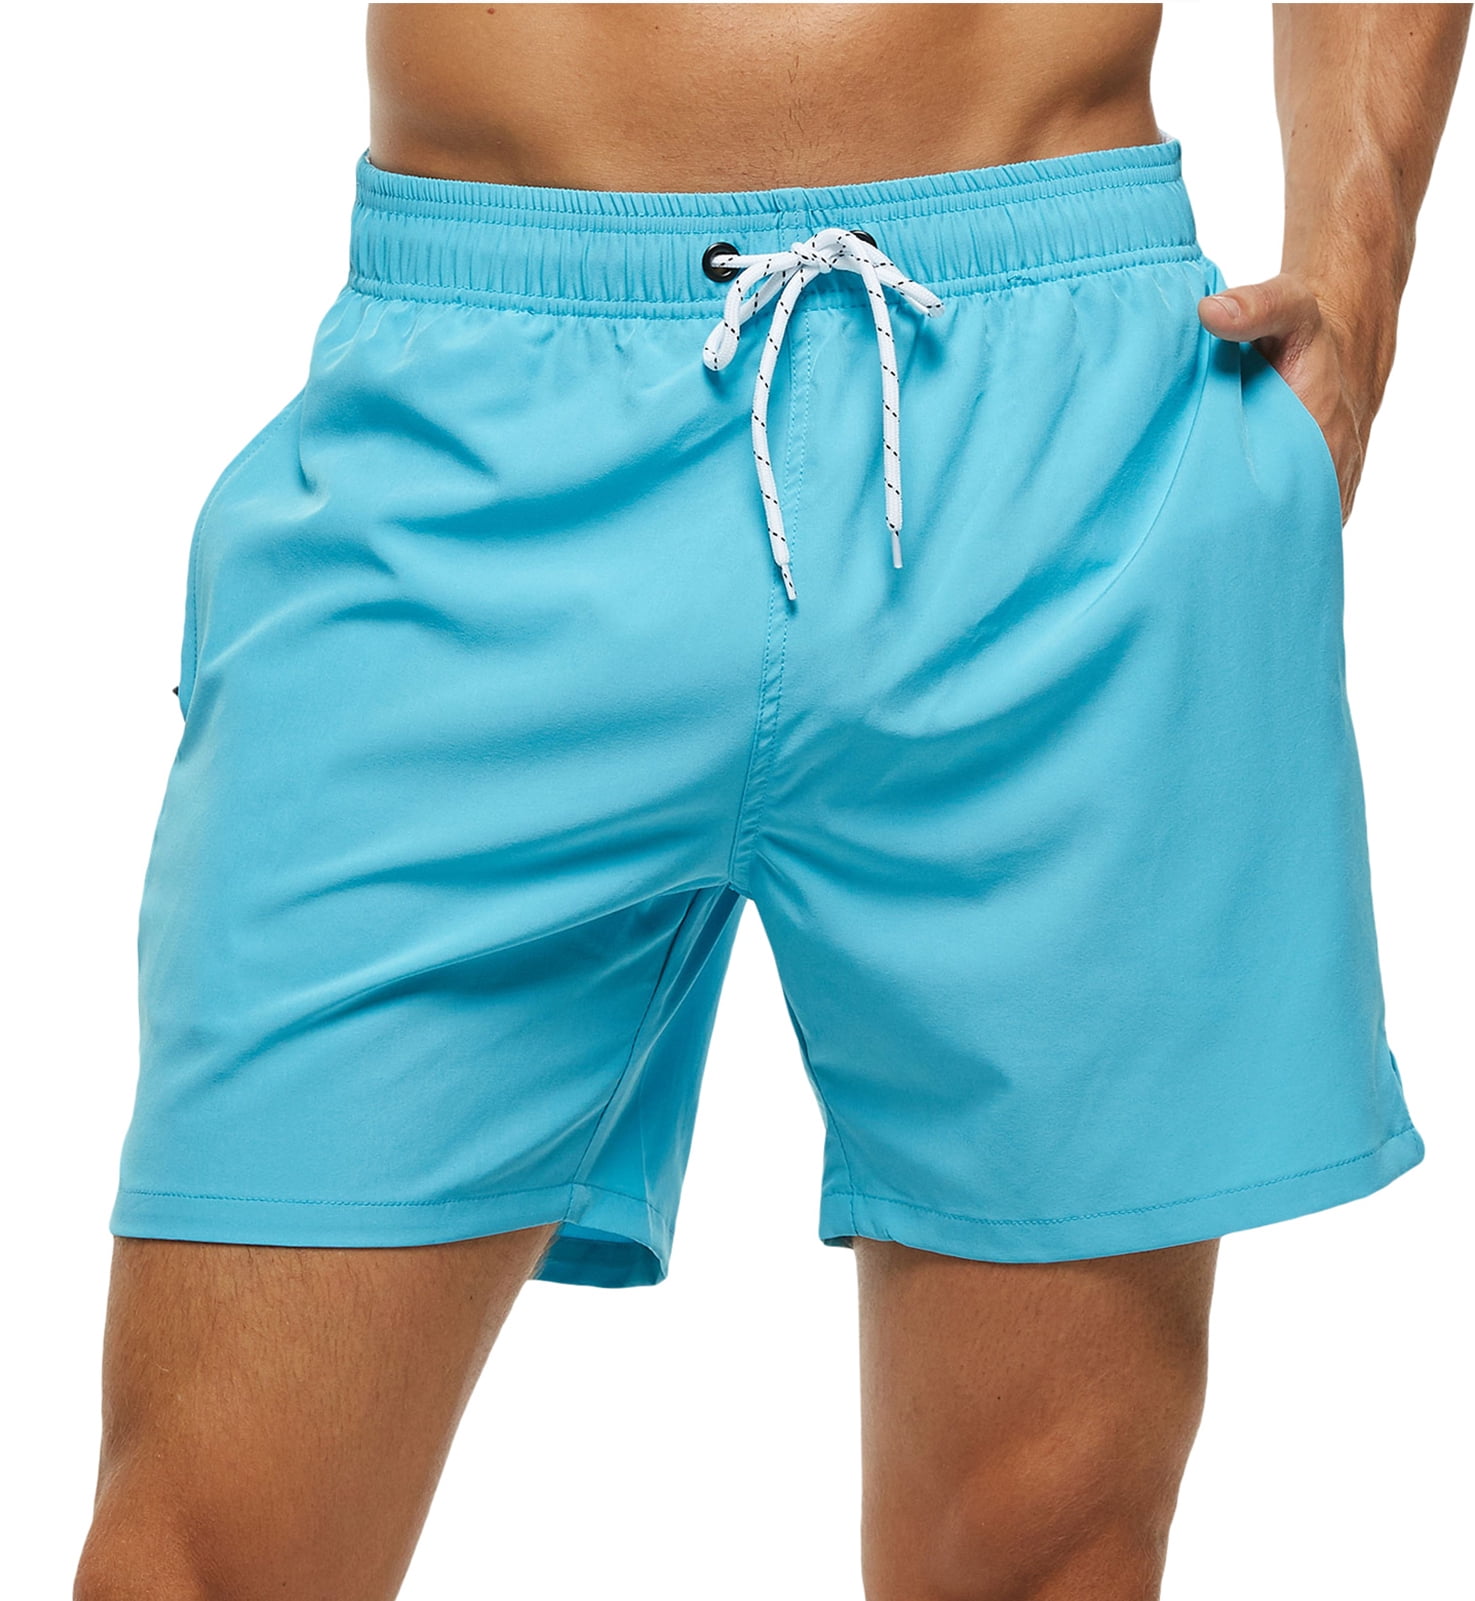 techcity Mens Swim Trunks with Compression Liner 2 in 1 Quick Dry